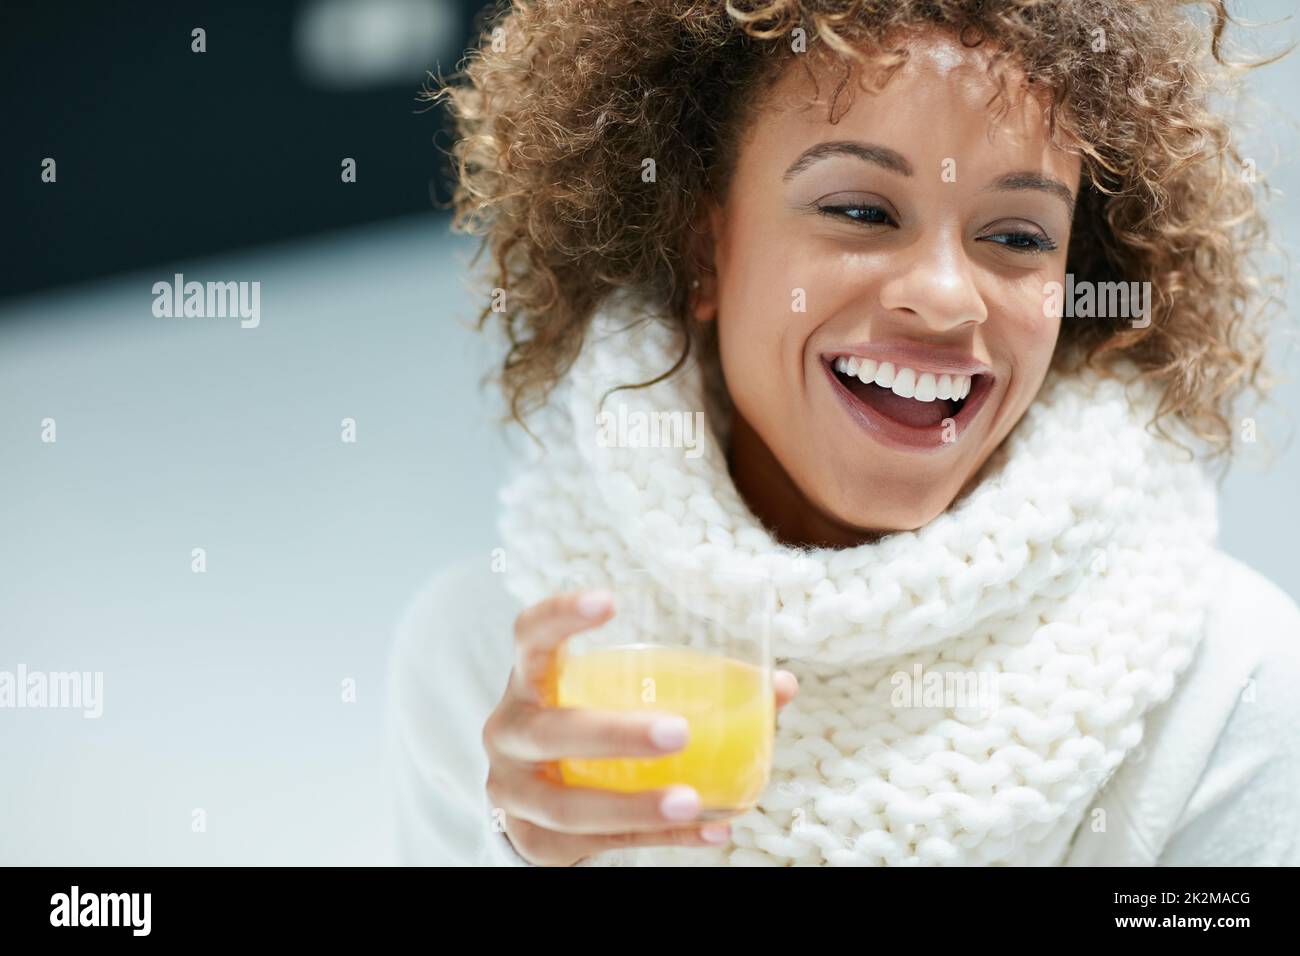 Keeping winter colds and flu at bay the citrusy way. Shot of a young woman dressed in warm clothing drinking a glass of orange juice. Stock Photo